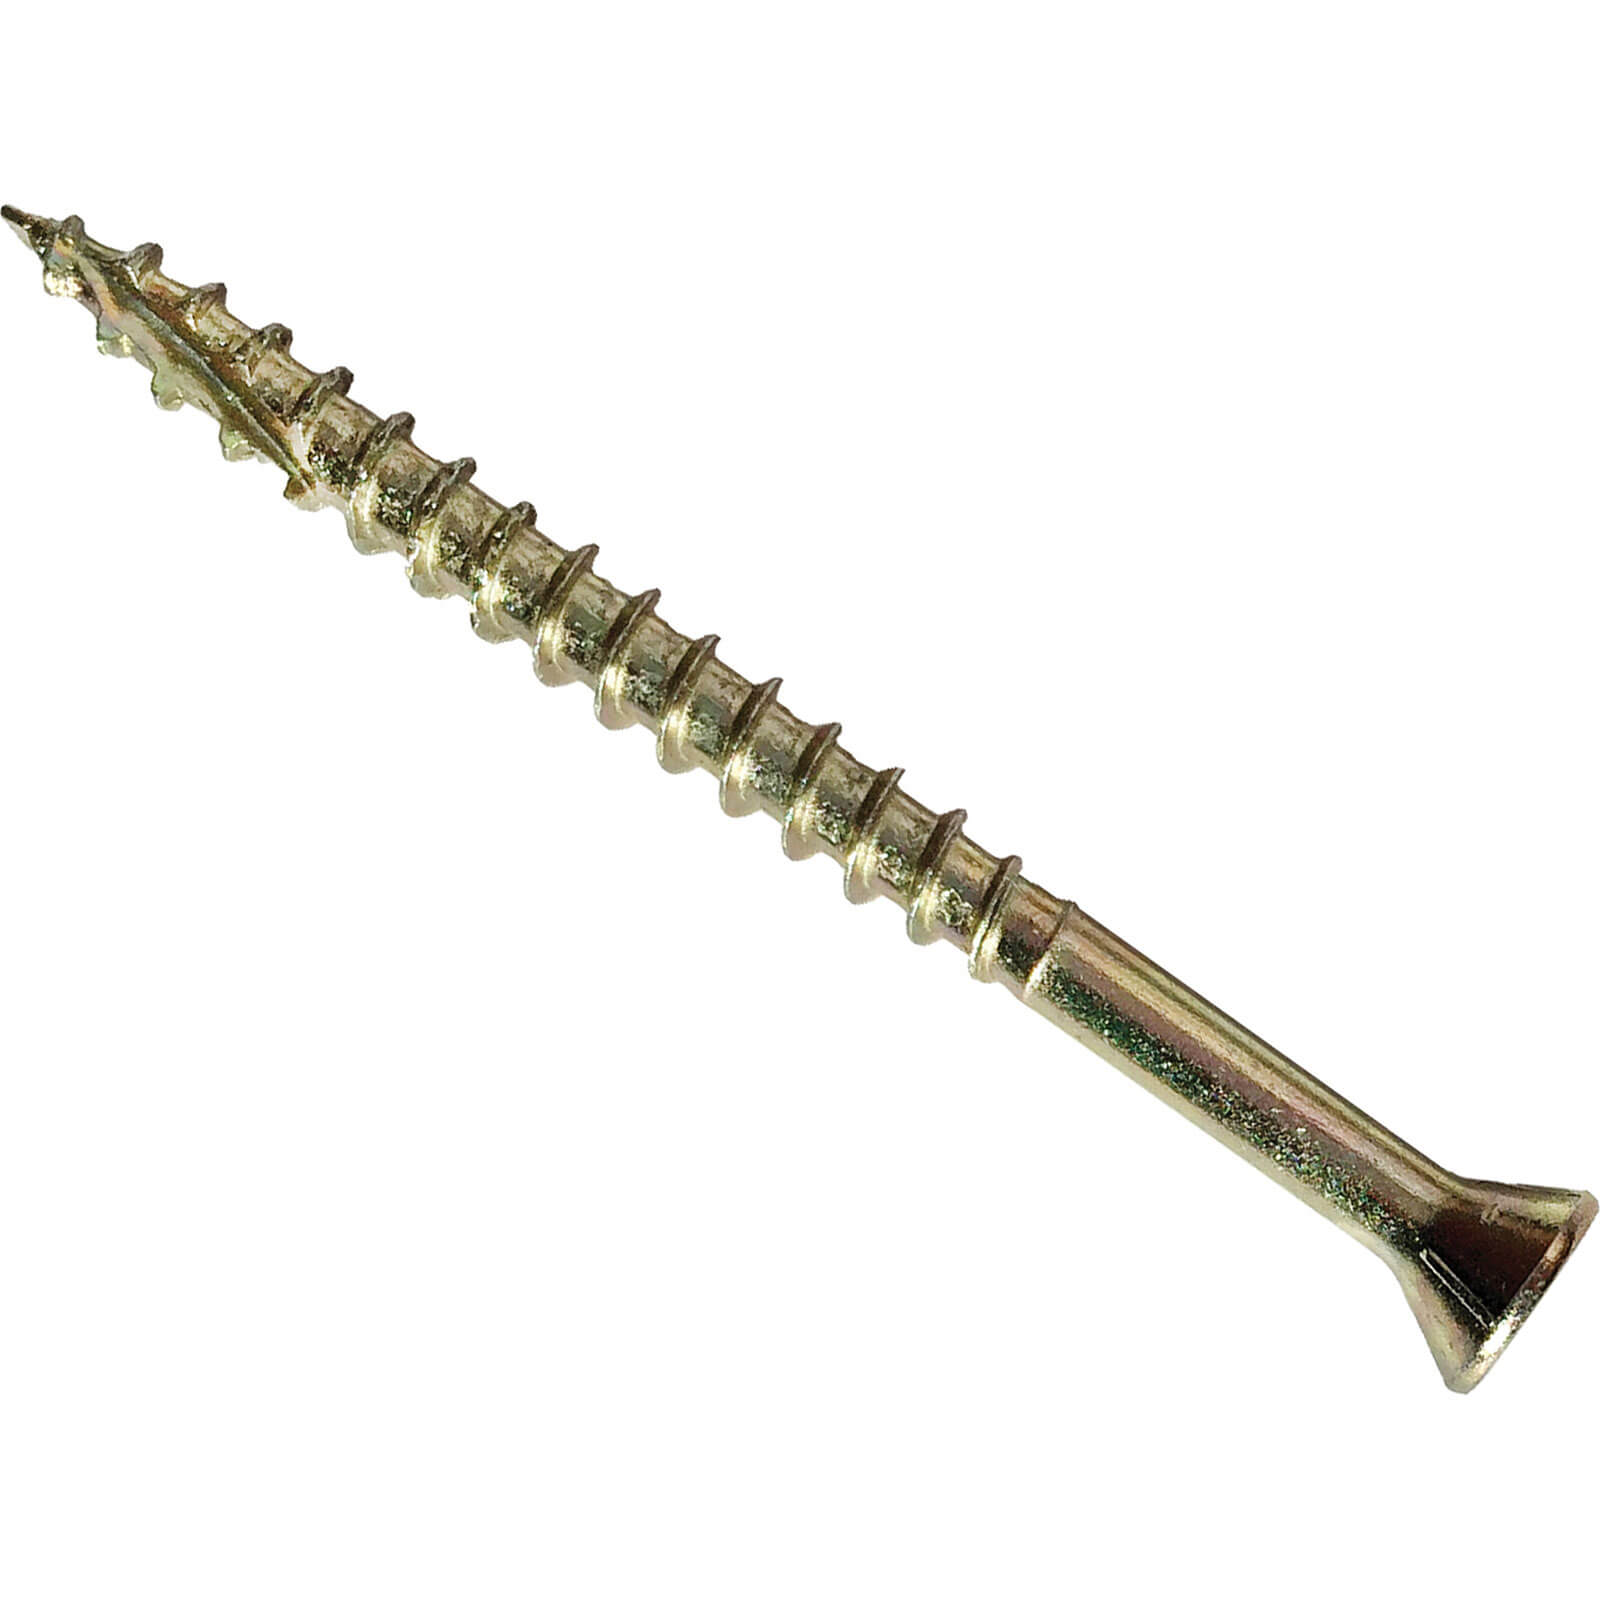 Photos - Nail / Screw / Fastener Forgefix Forgefast Torx Tongue and Groove Flooring Screws 3.5mm 45mm Pack 